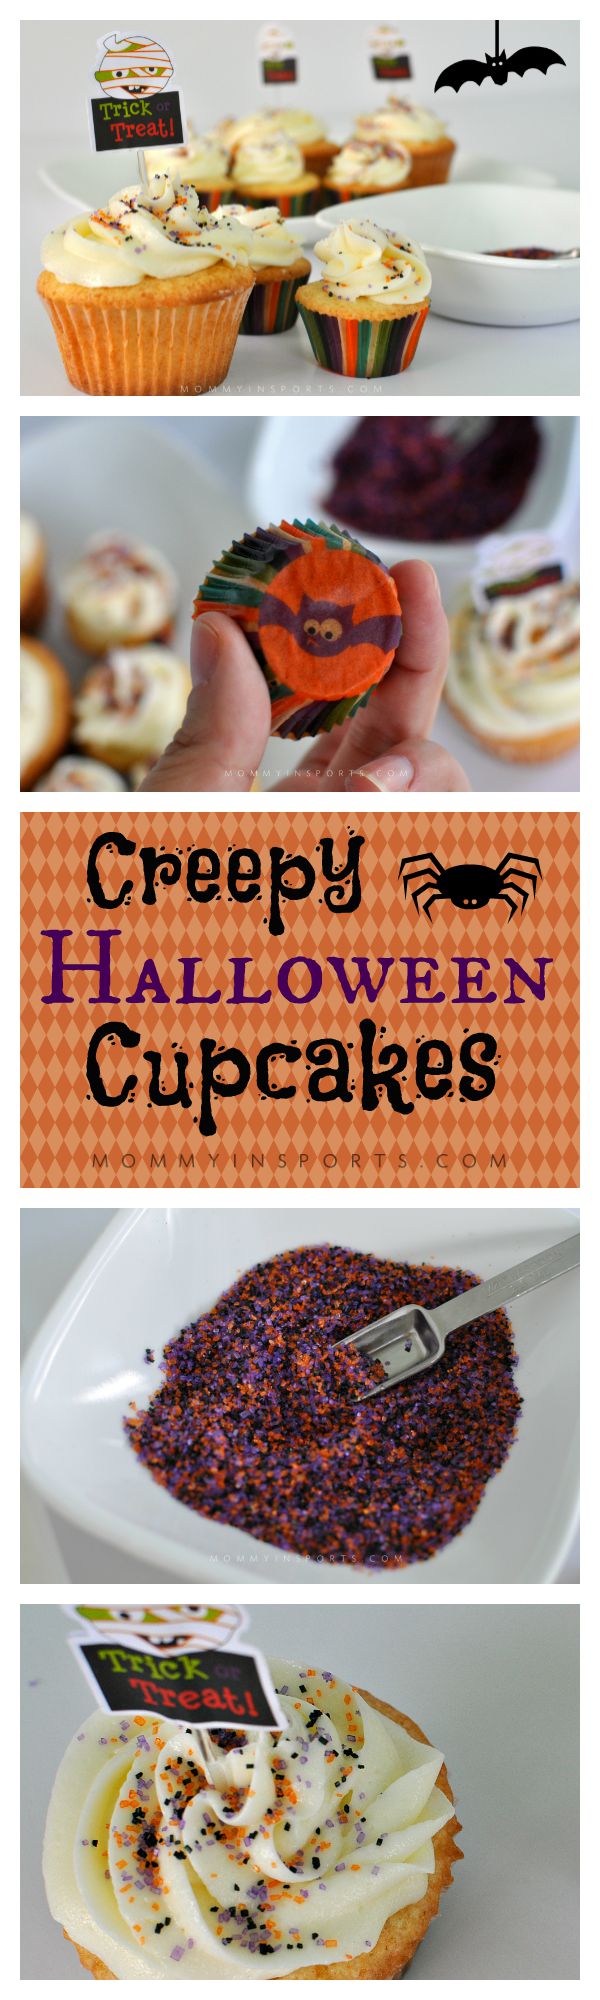 Looking for an easy way to celebrate Halloween with the kids?! Get creative in the kitchen with these delicious Halloween cupcakes! Simple is best don't you think?!